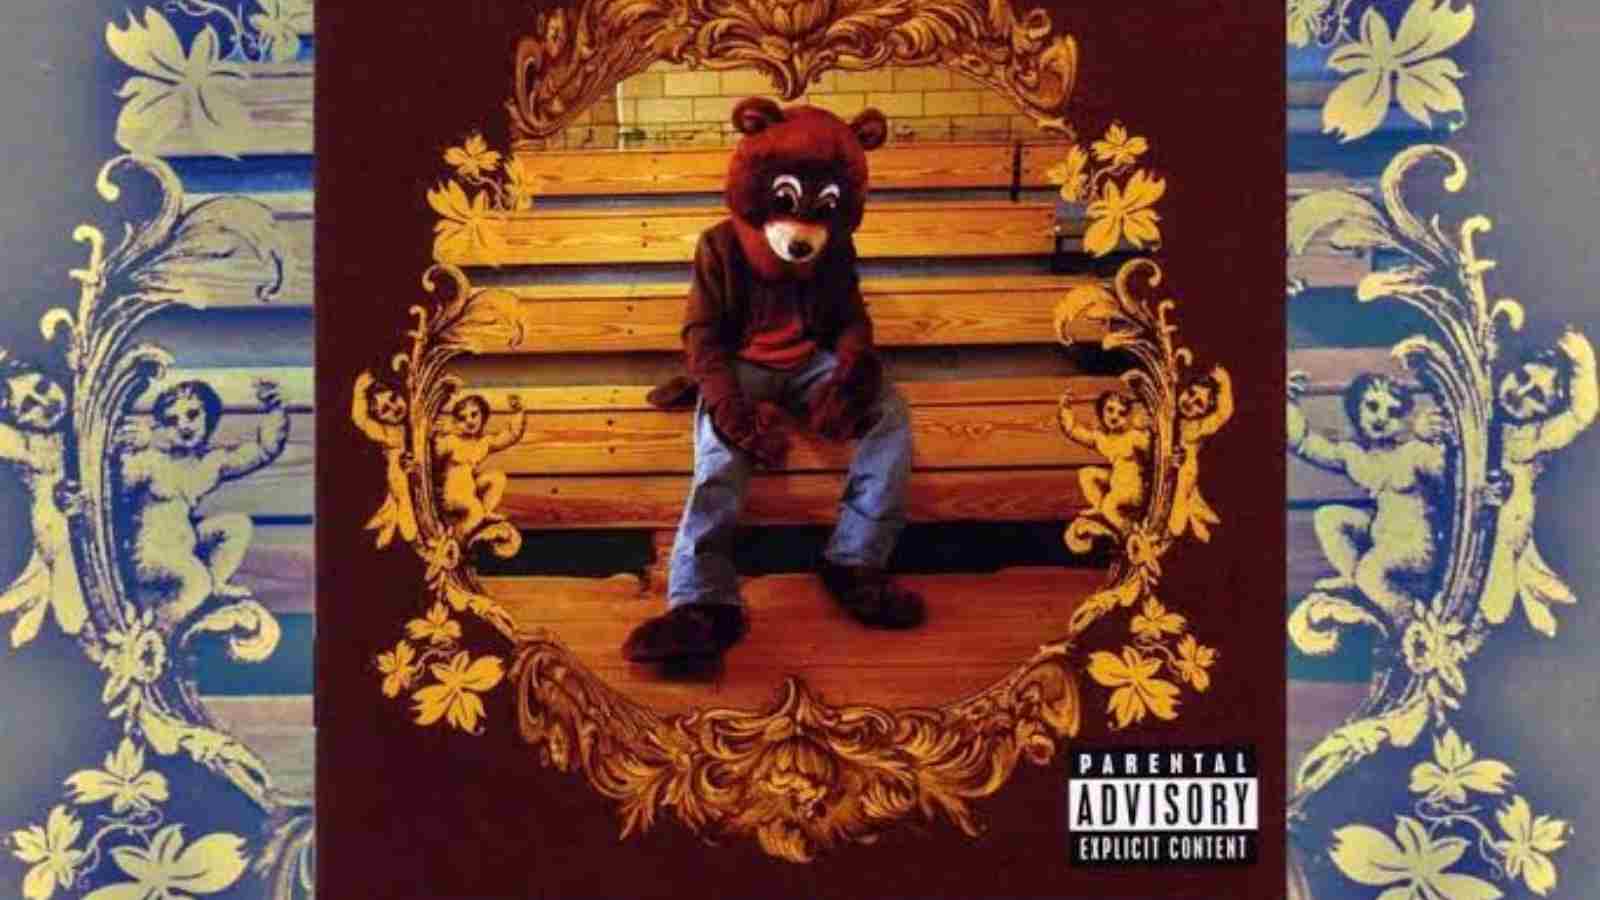 Kanye West's College Dropout